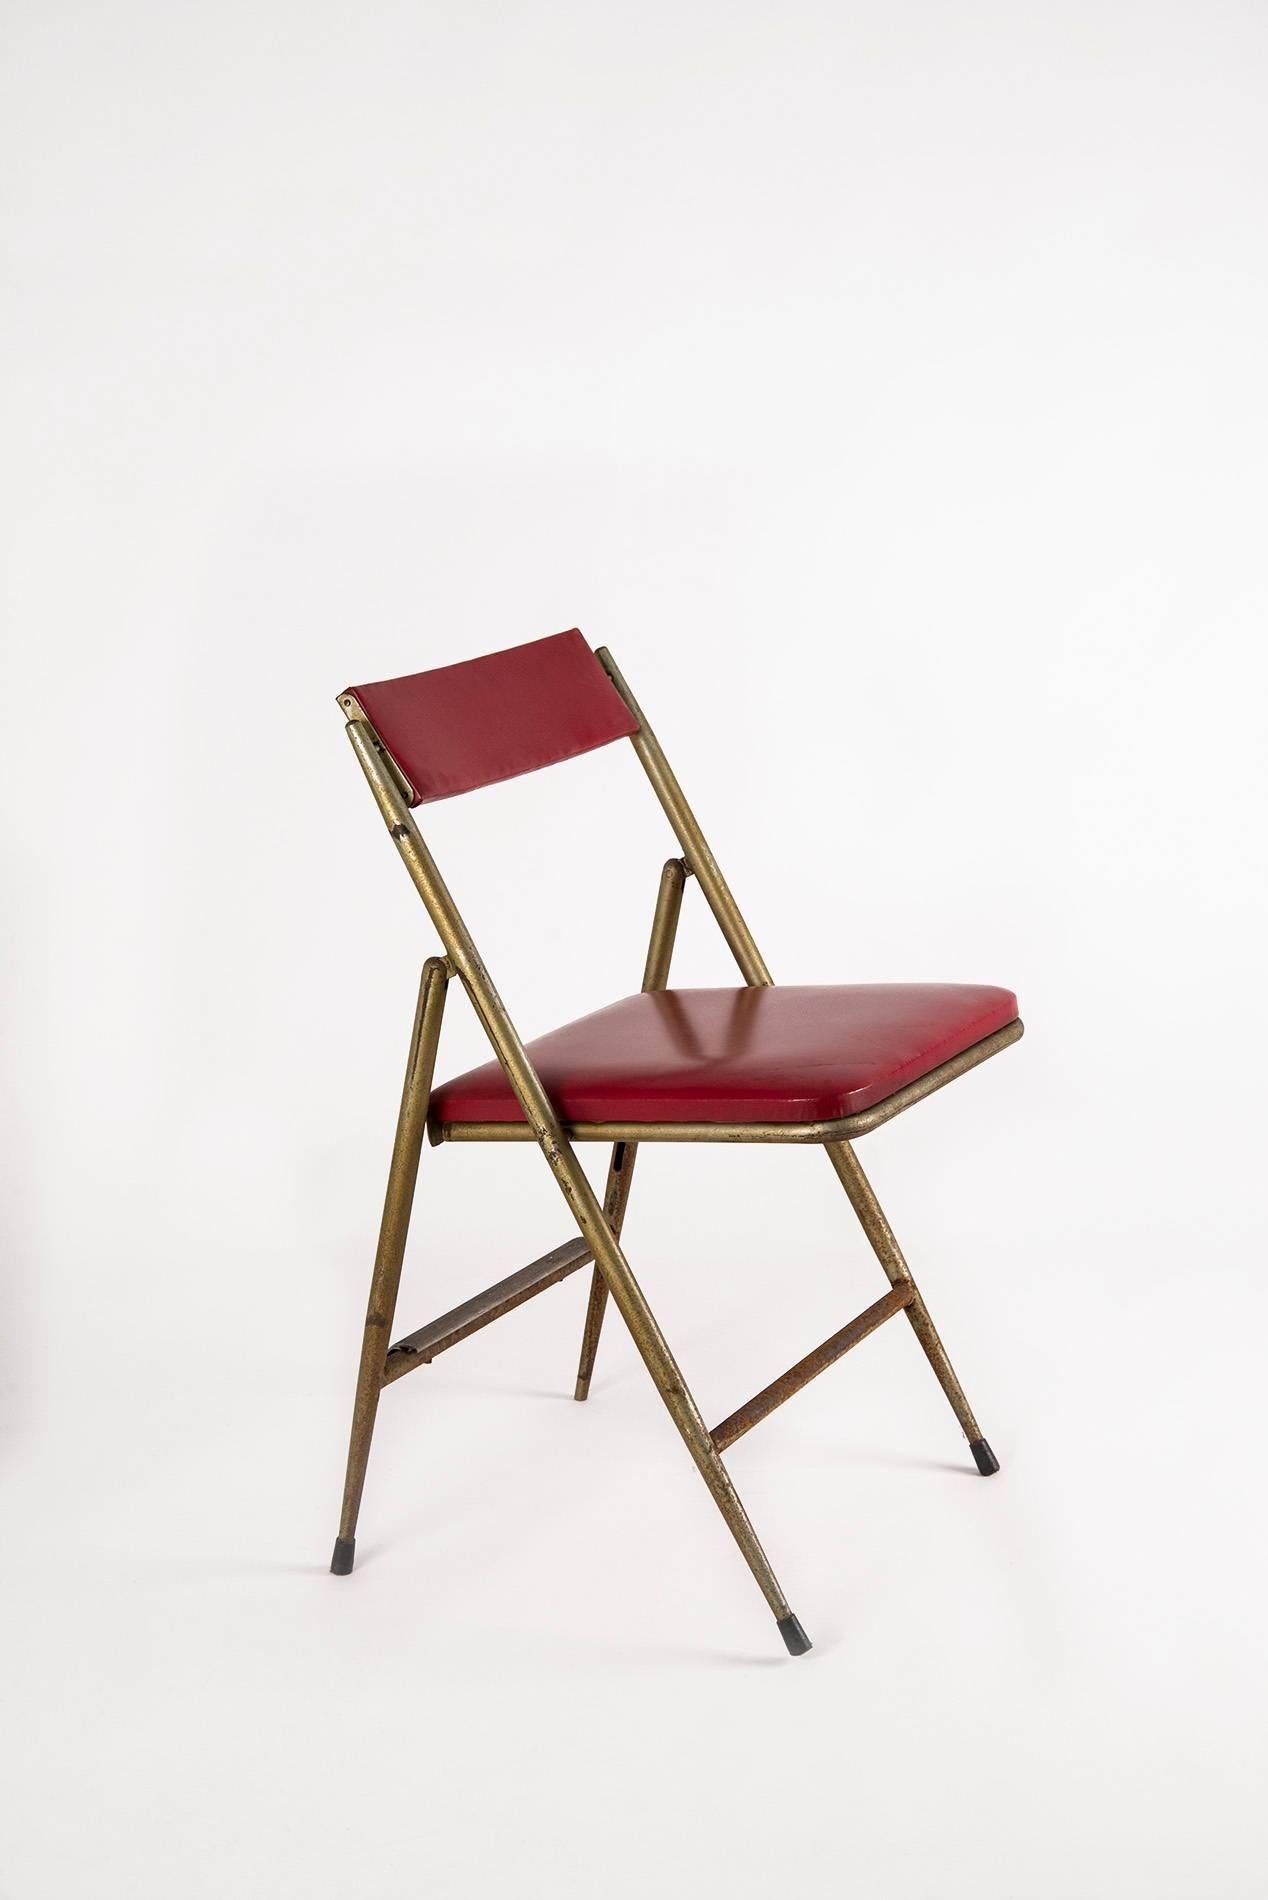 Pair of extraordinary folding chairs designed by Gio Ponti, manufactured by Cagliani e Marazza in the 1950s. Painted tubular iron structure, upholstery covered with red faux leather (resinflex), metal back feet-rest. Massive patina on the frame,